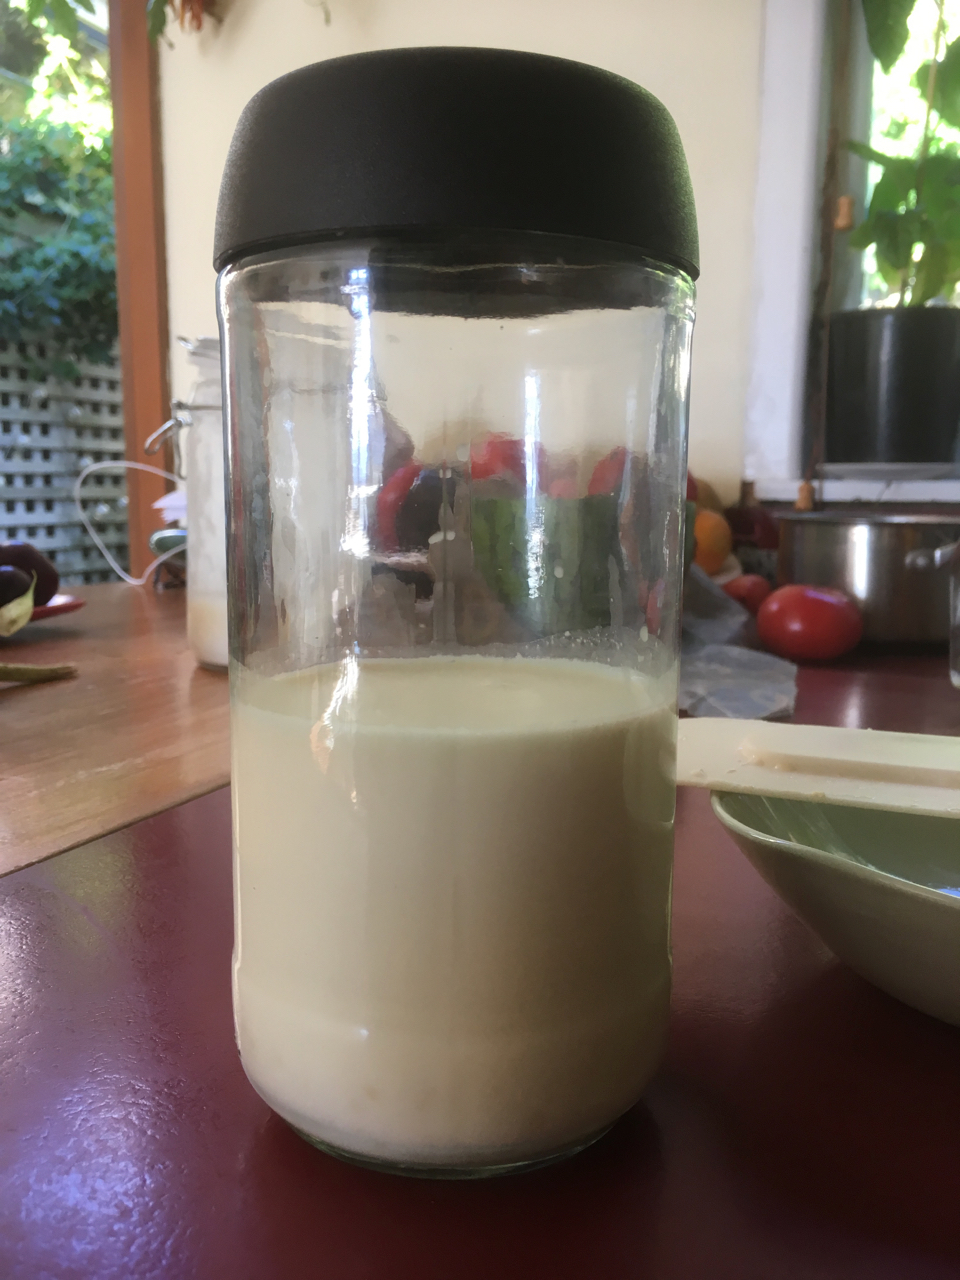 Closeup view of clean glass jar that is half full of milk. The jar is fitted with a deep, brown, plastic lid. The jar contains kefir granules but are submerged in the milk and they cannot be seen. The jar is sitting on a kitchen bench that has a variety of fruit, utensils and potted plants in the background..